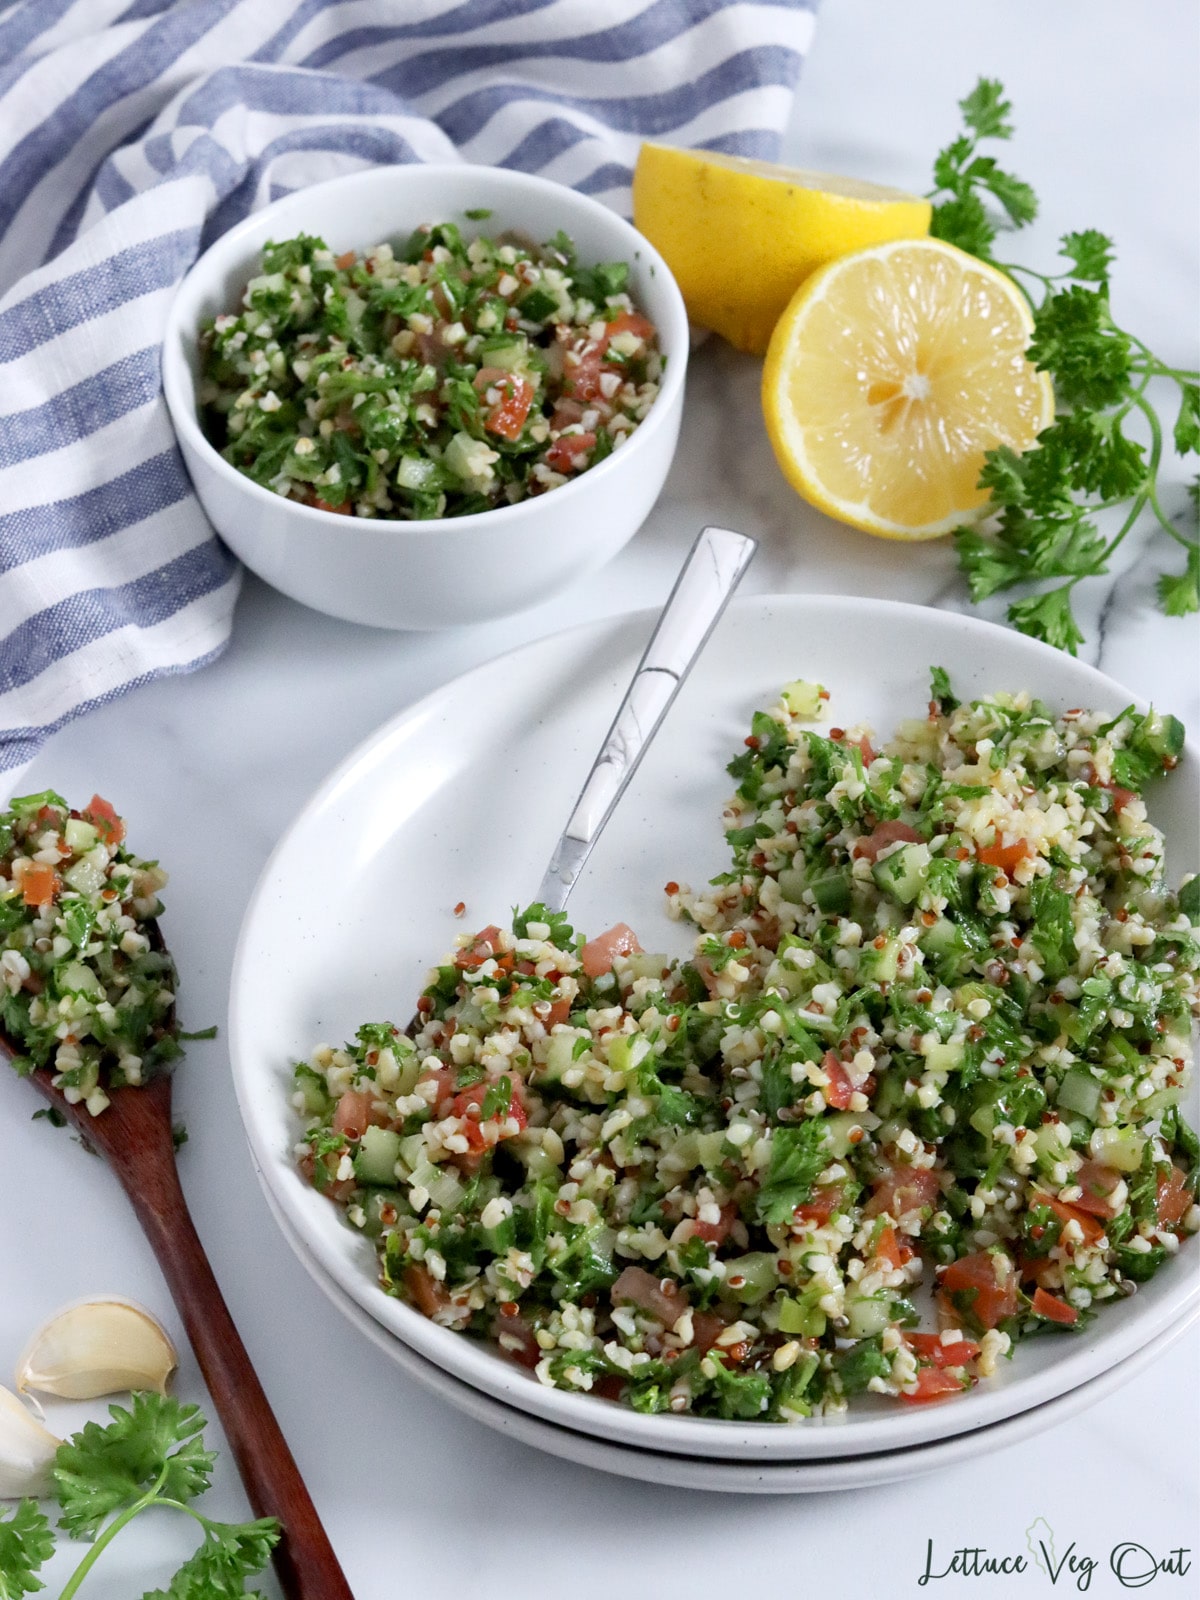 Plate of tabbouleh salad (parsley, bulgur, onion, tomato) with small bowl of salad in the back.